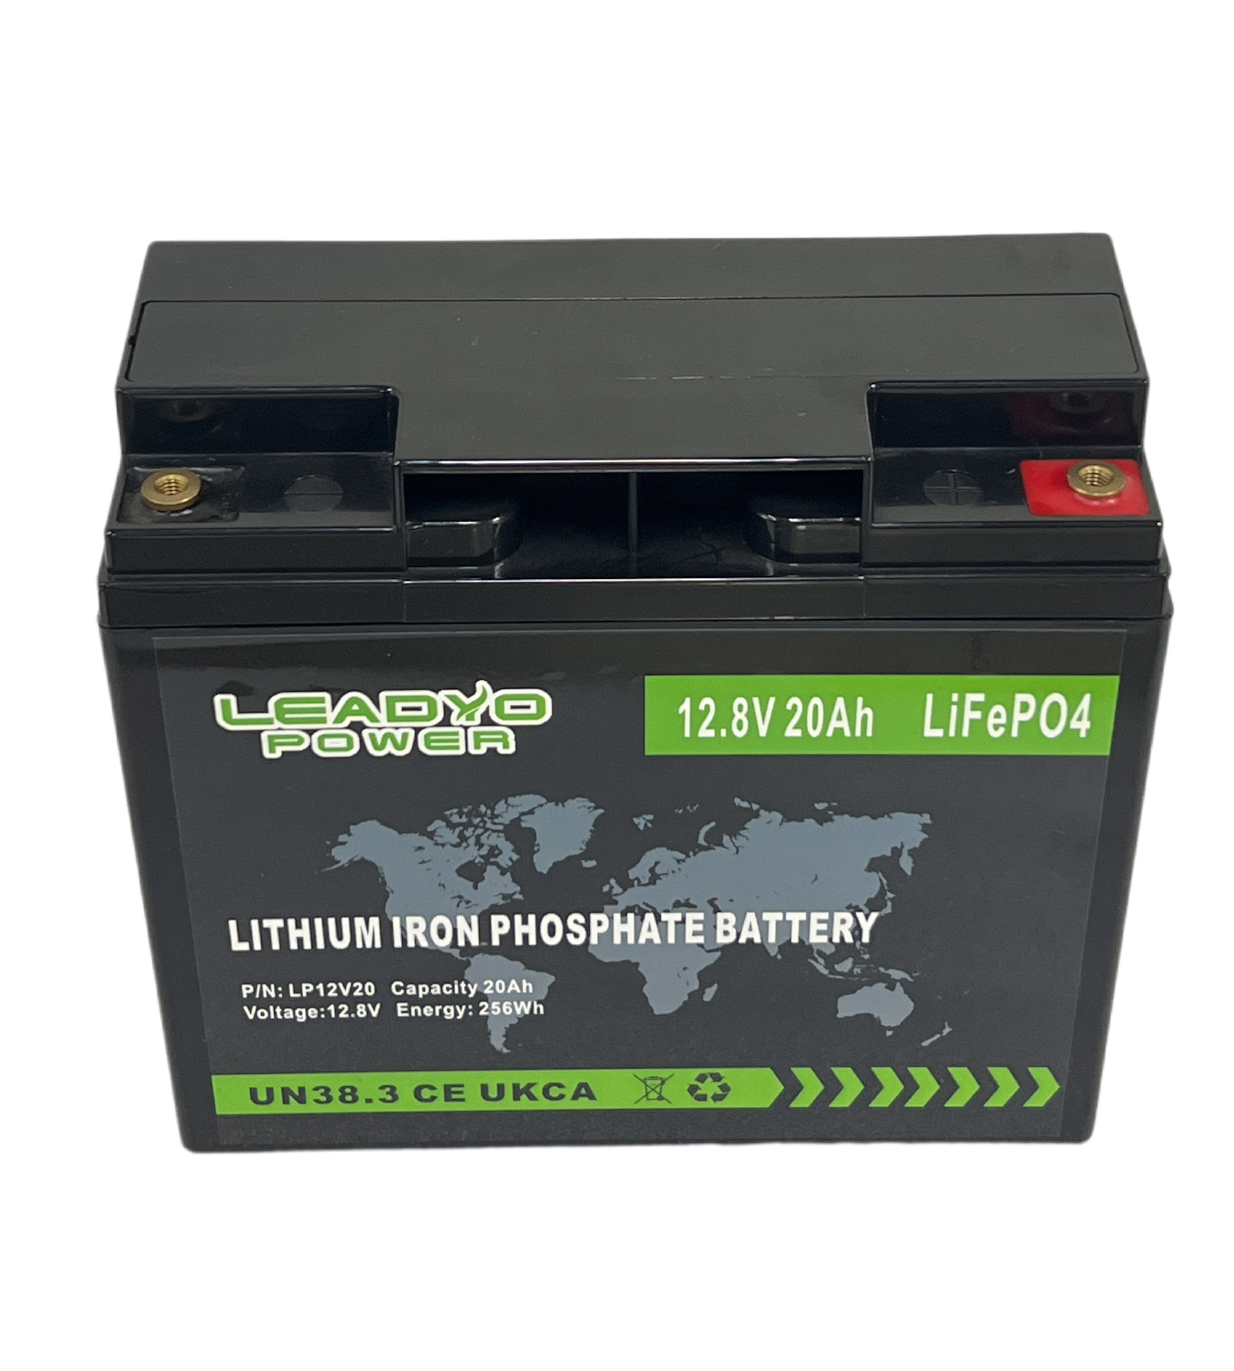 Power Up Your Devices with Leadyo's High-Quality LiFePO4 Batteries